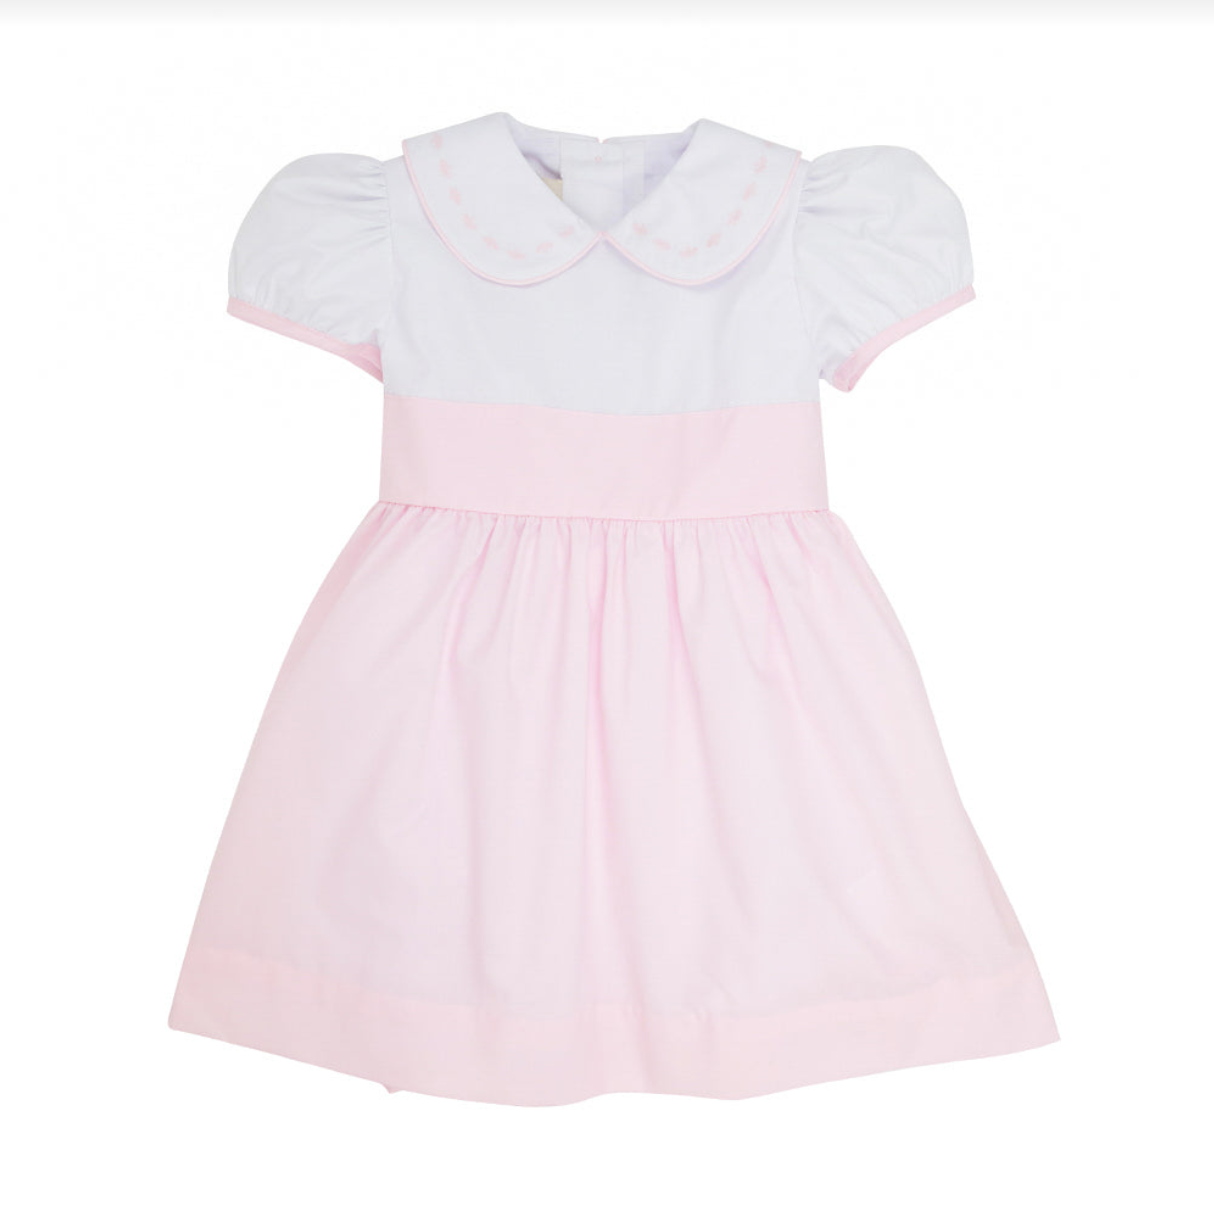 Cindy Lou Sash Dress Broadcloth in Worth Avenue White and Palm Beach Pink